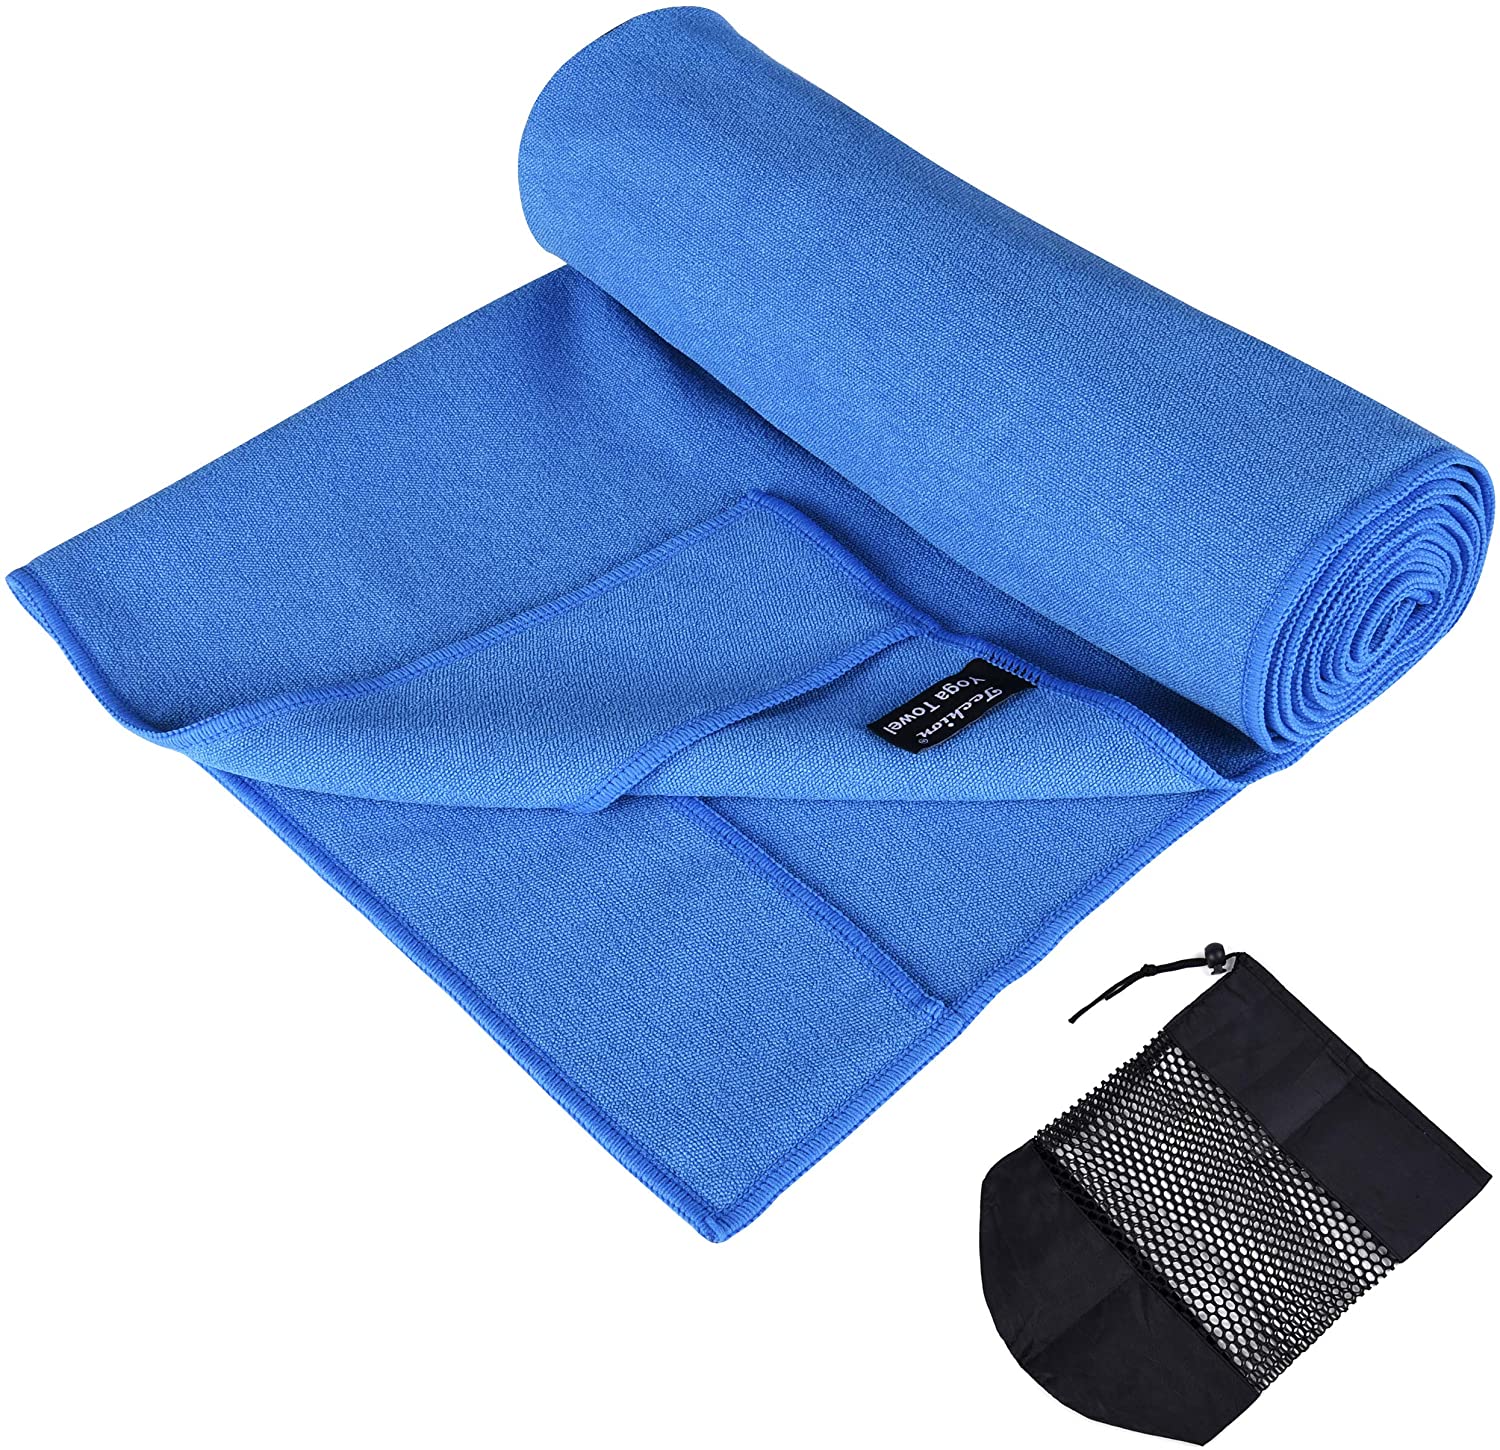 Blue Non-Slip Microfiber Hot Yoga Towel with Carry Bag - Hobby Monsters